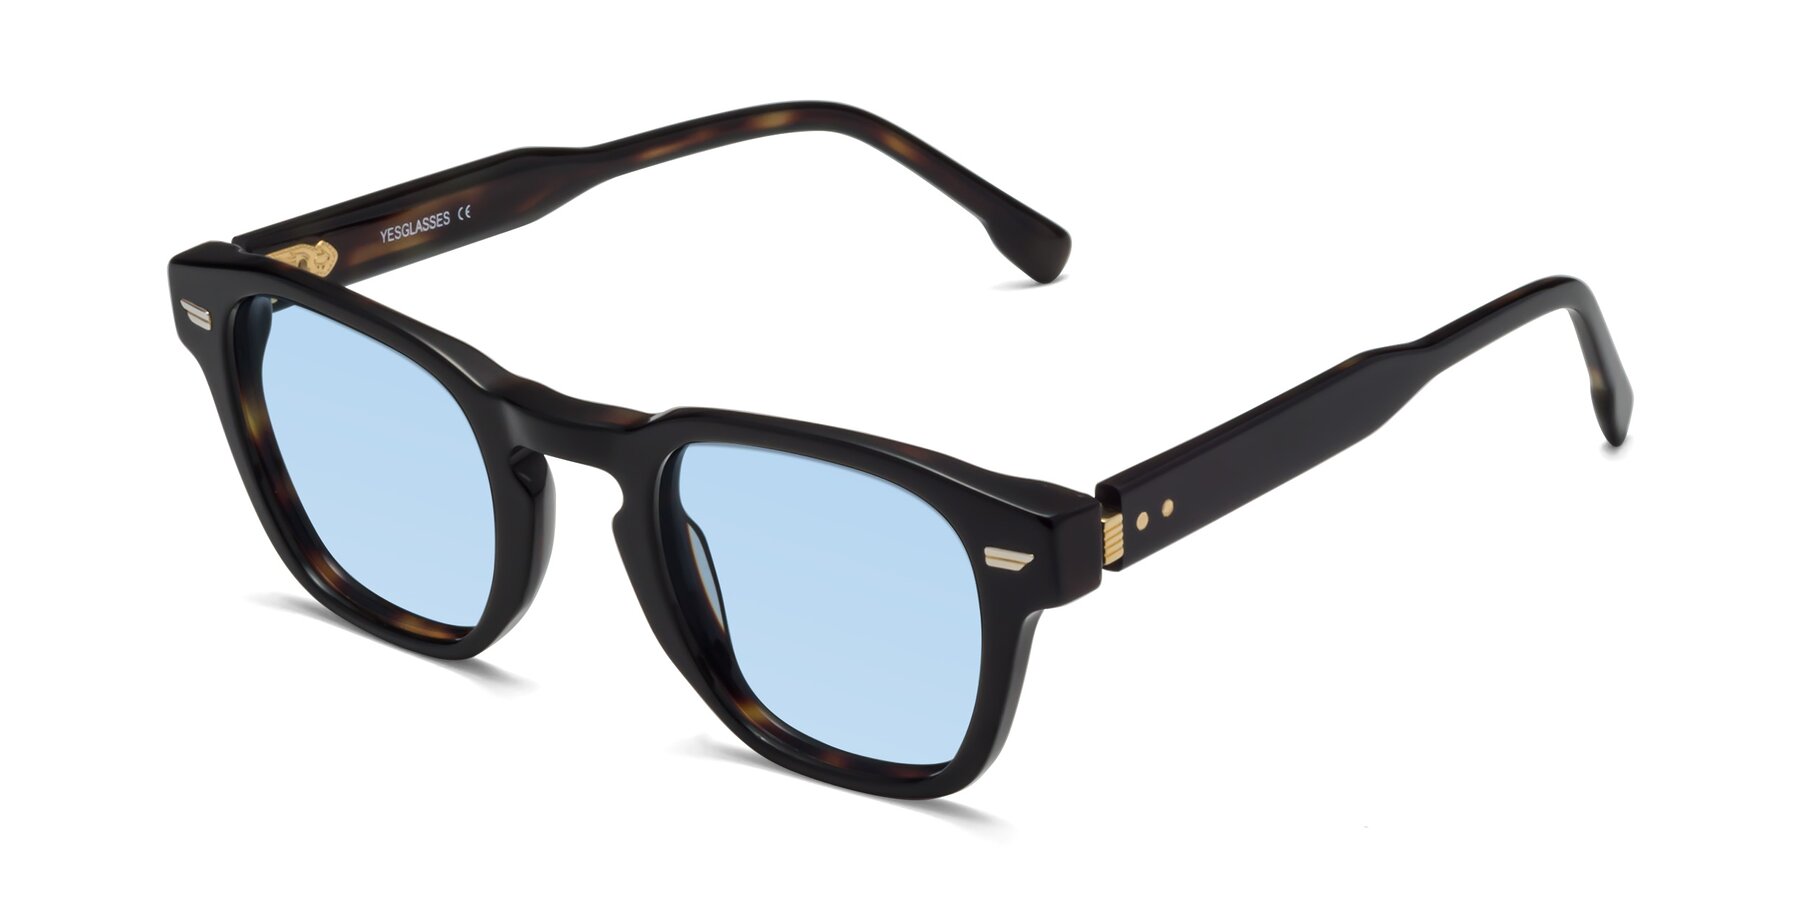 Angle of 1421 in Black-Tortoise with Light Blue Tinted Lenses